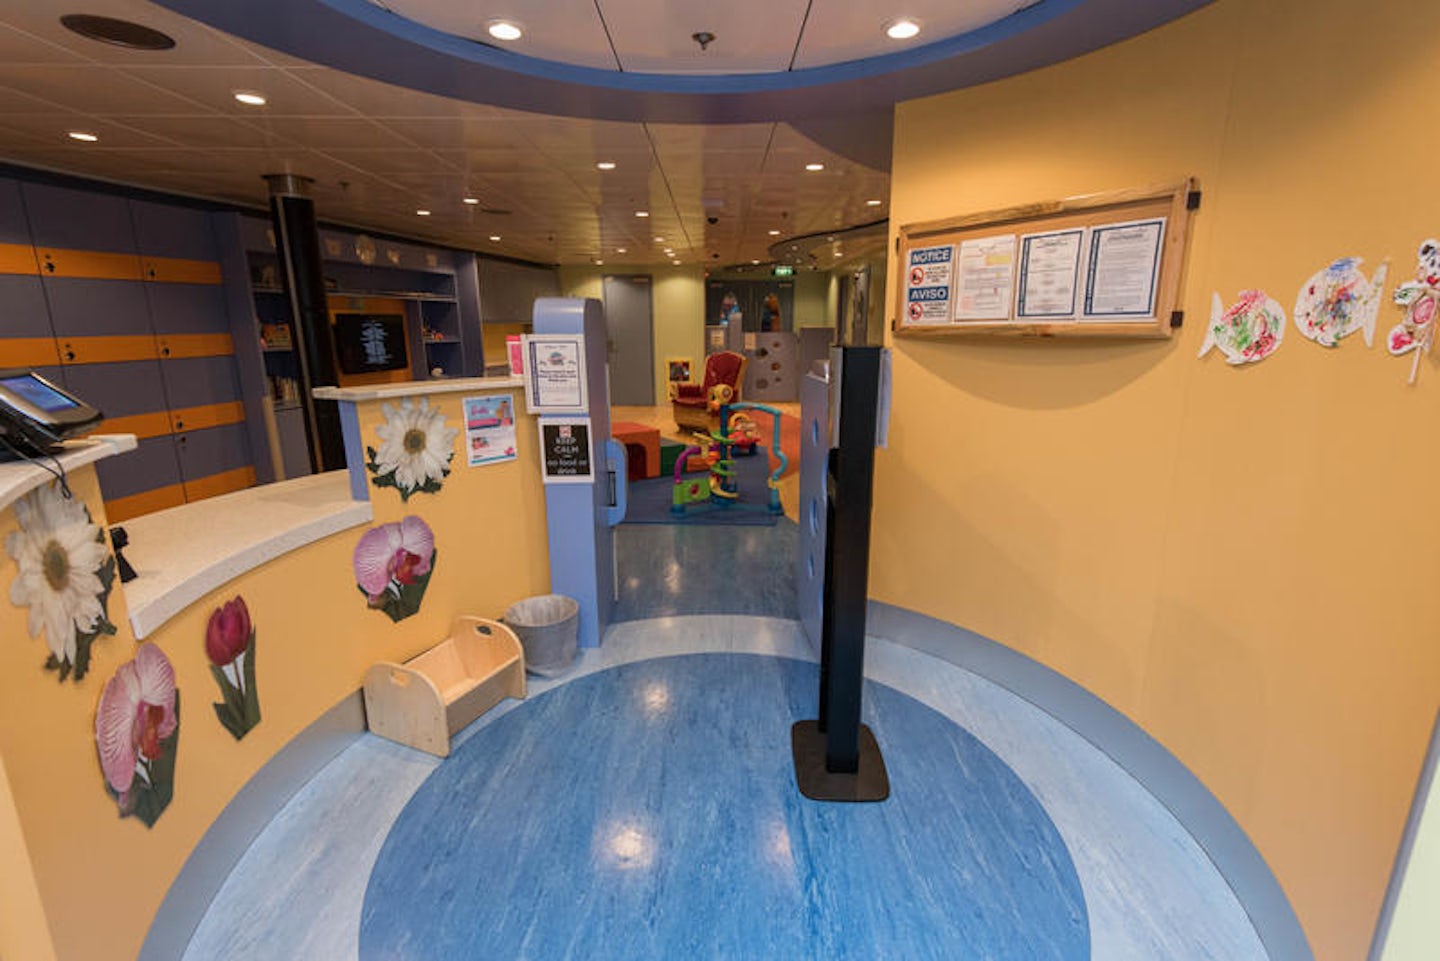 Royal Babies & Tots on Brilliance of the Seas